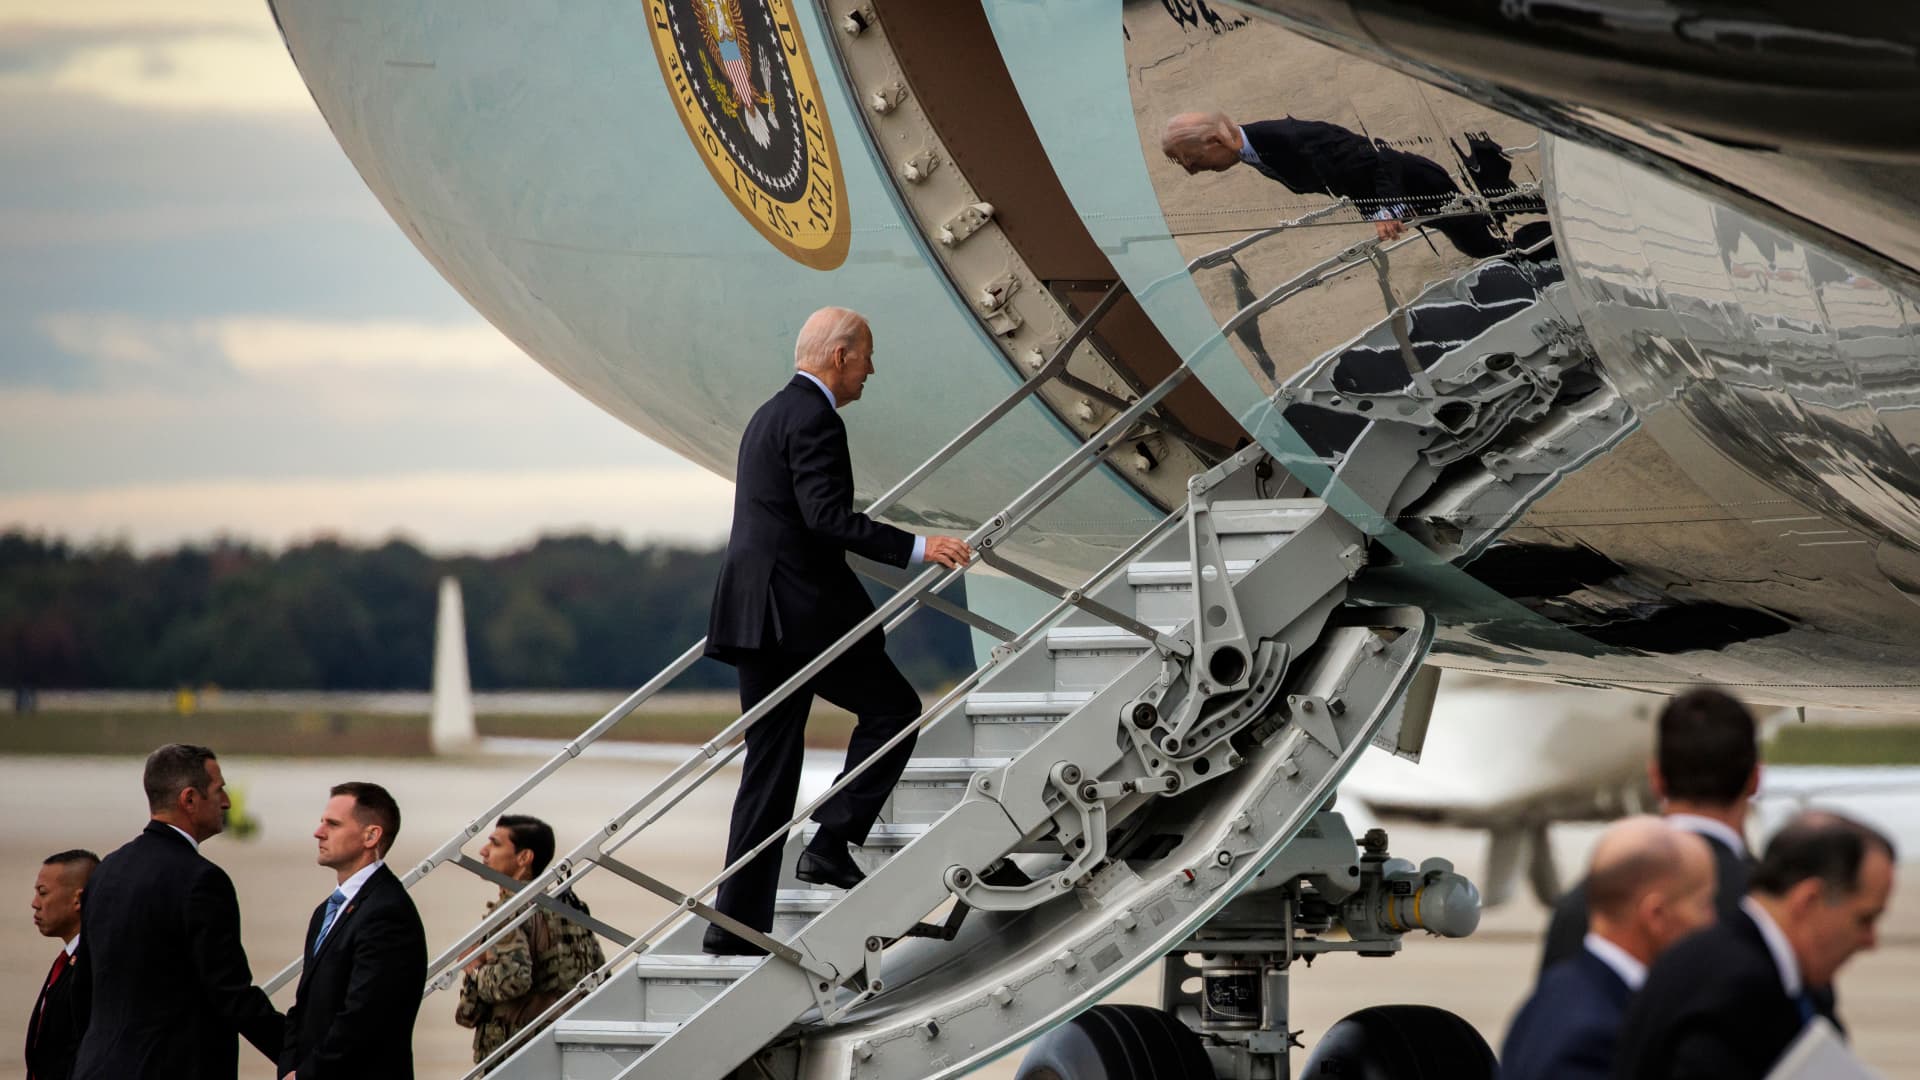 US President Joe Biden boards Air Force One at Joint Base Andrews, Maryland, US, on Tuesday, Oct. 17, 2023. Biden will make a dangerous and politically risky trip to Israel intended to show solidarity with the US's closest ally in the Middle East and prevent the conflict from engulfing the wider region. Photographer: Samuel Corum/Sipa/Bloomberg via Getty Images